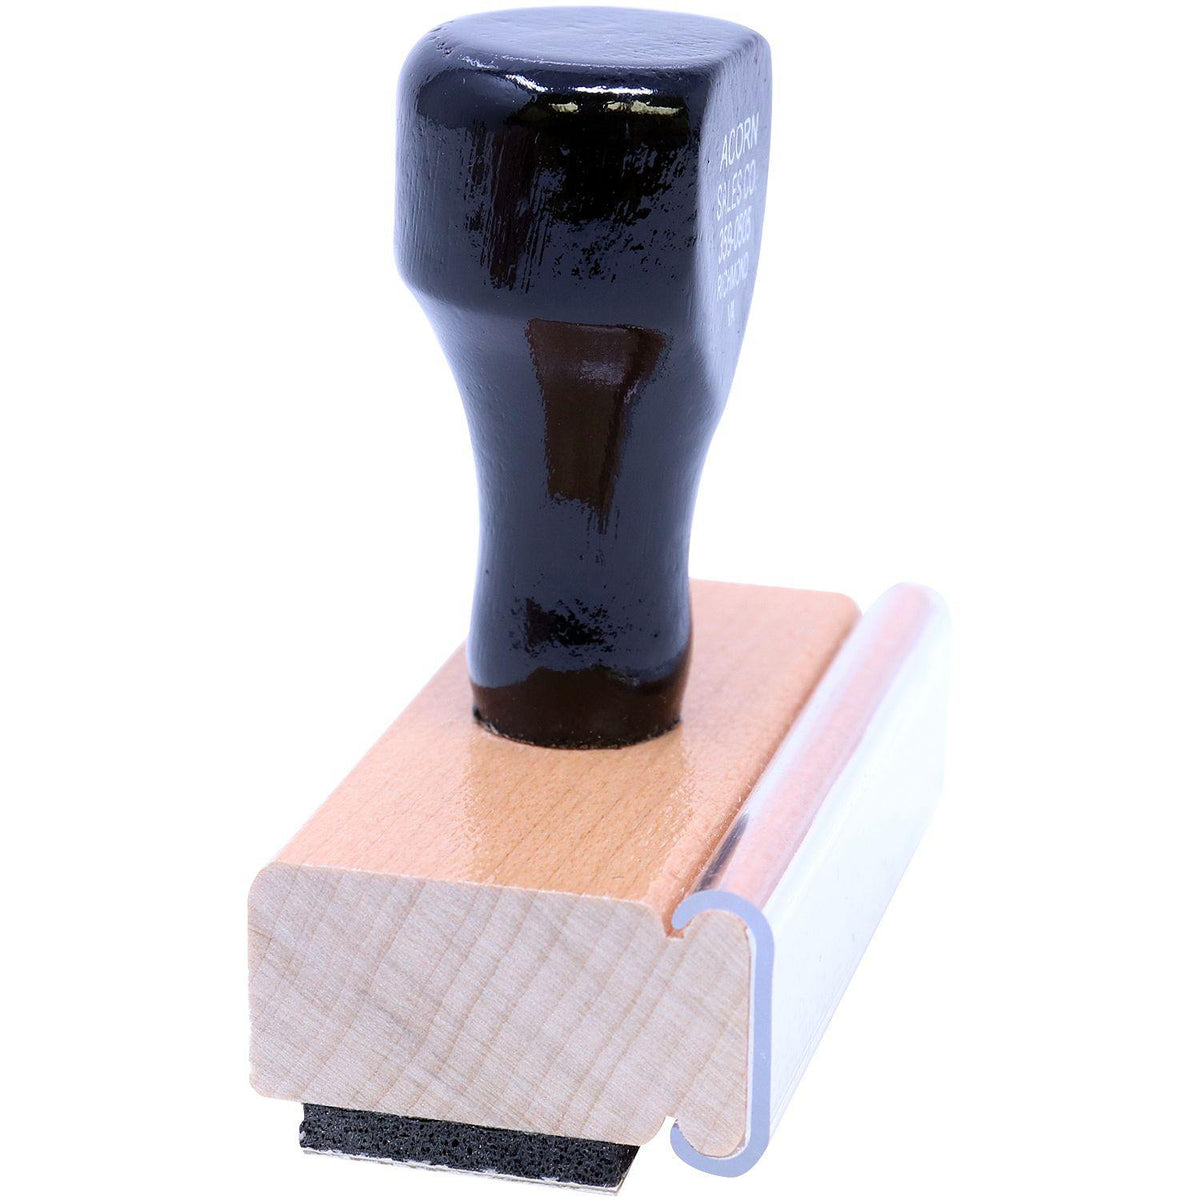 Side View of Large Patients Signature on File Rubber Stamp at an Angle